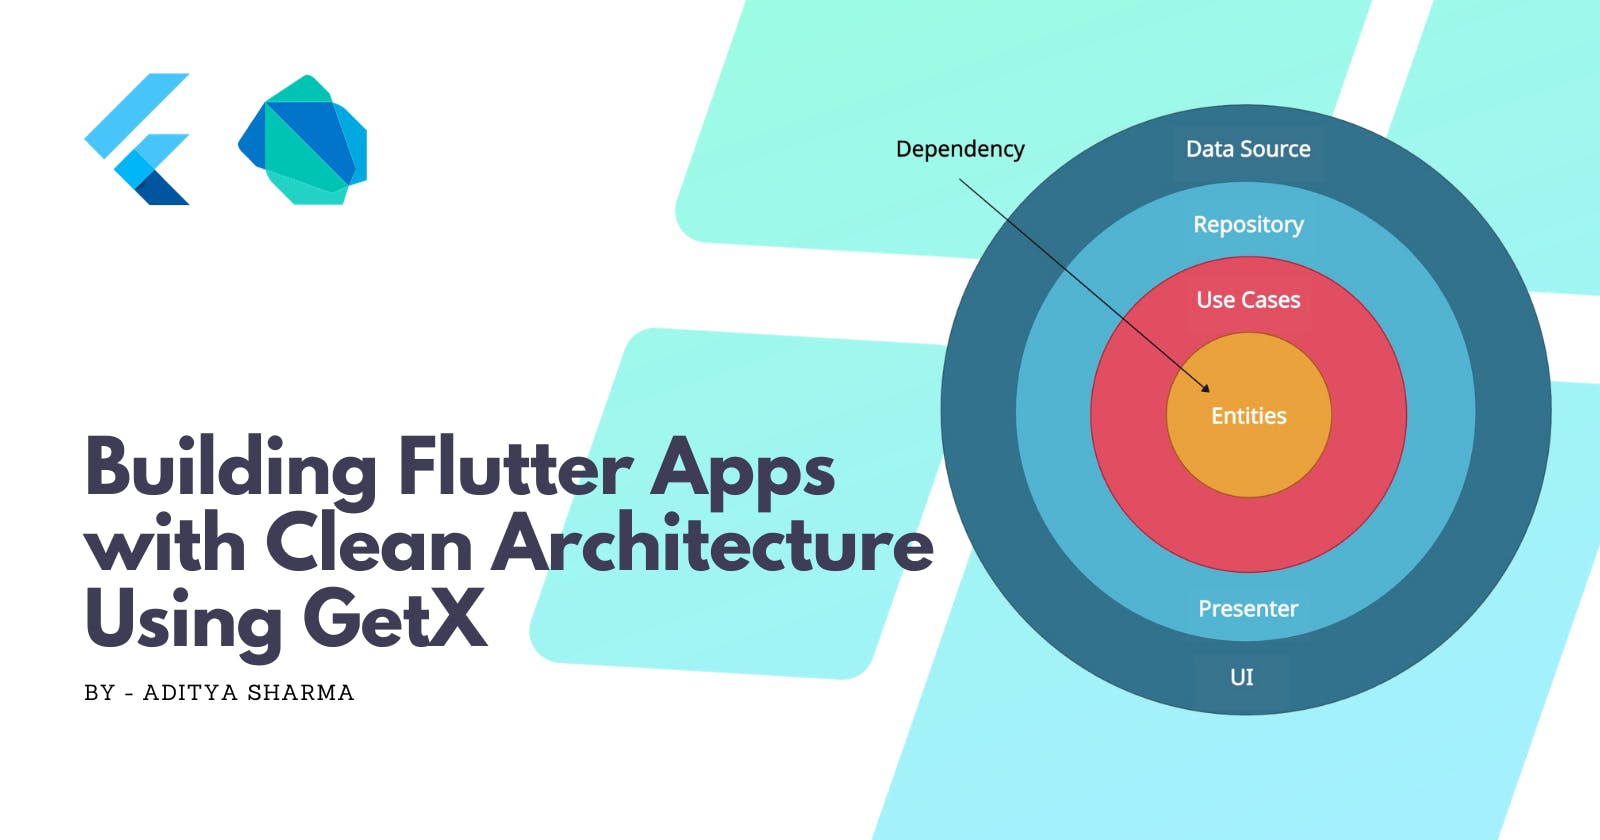 Building Flutter Apps with Clean Architecture Using GetX